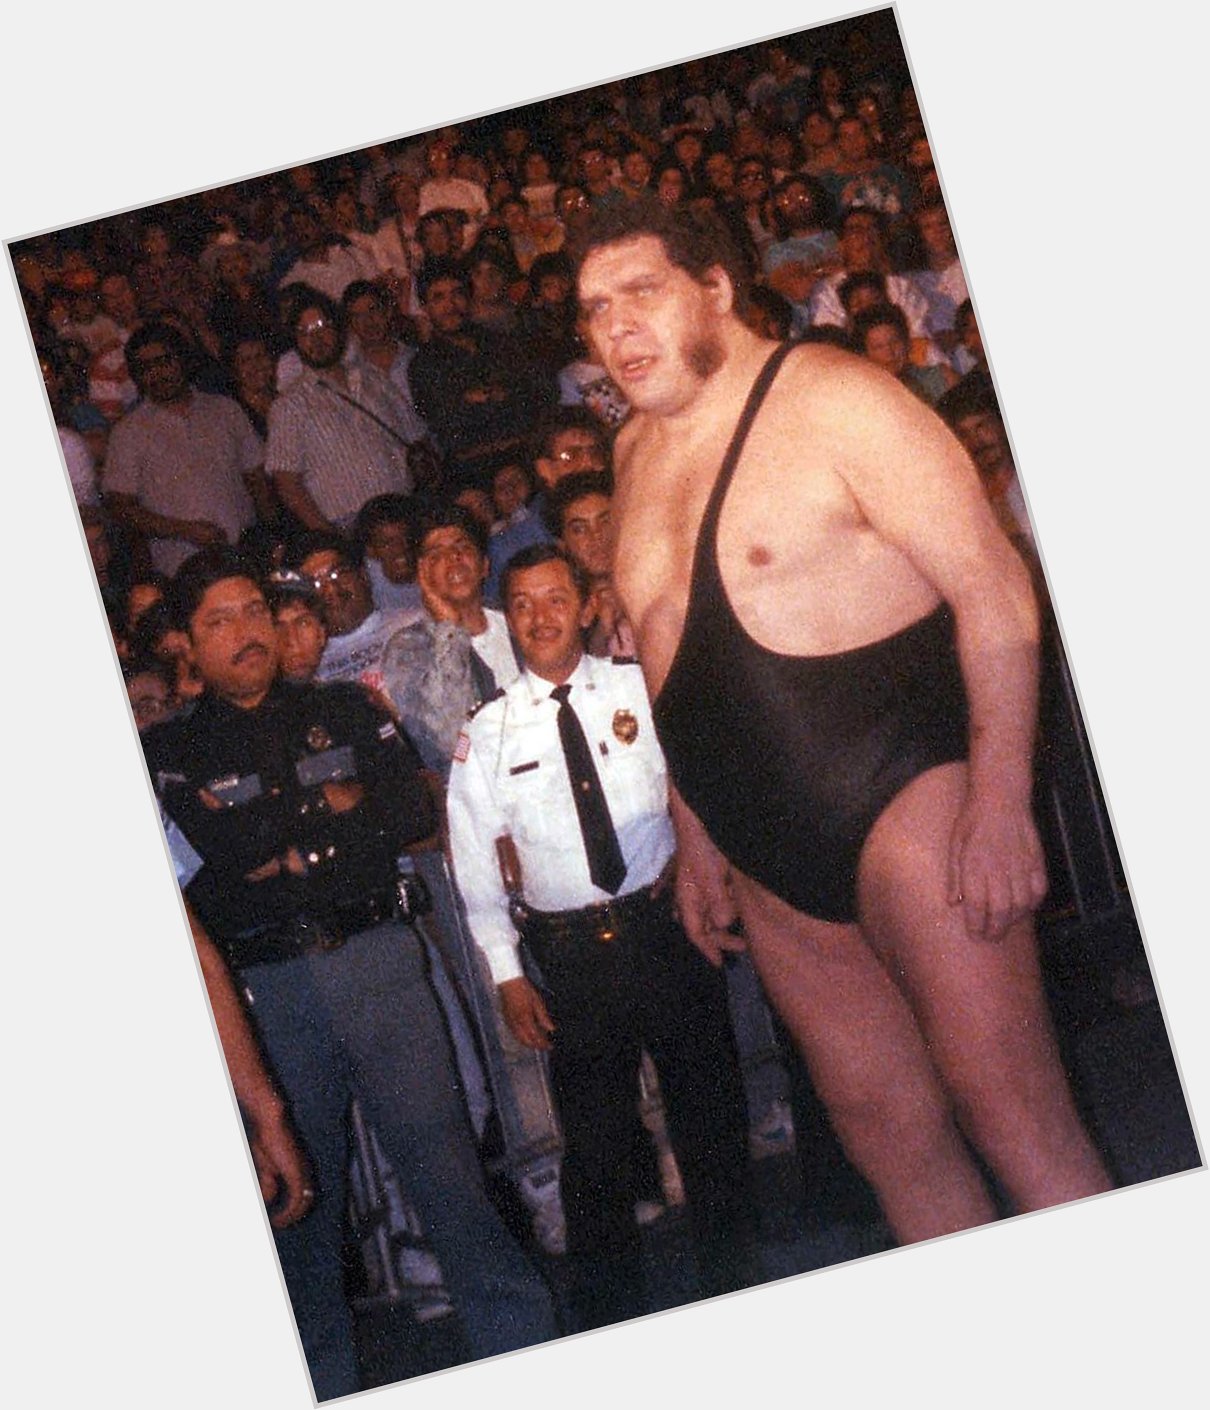 Happy birthday andre the giant, you will be remembered. 